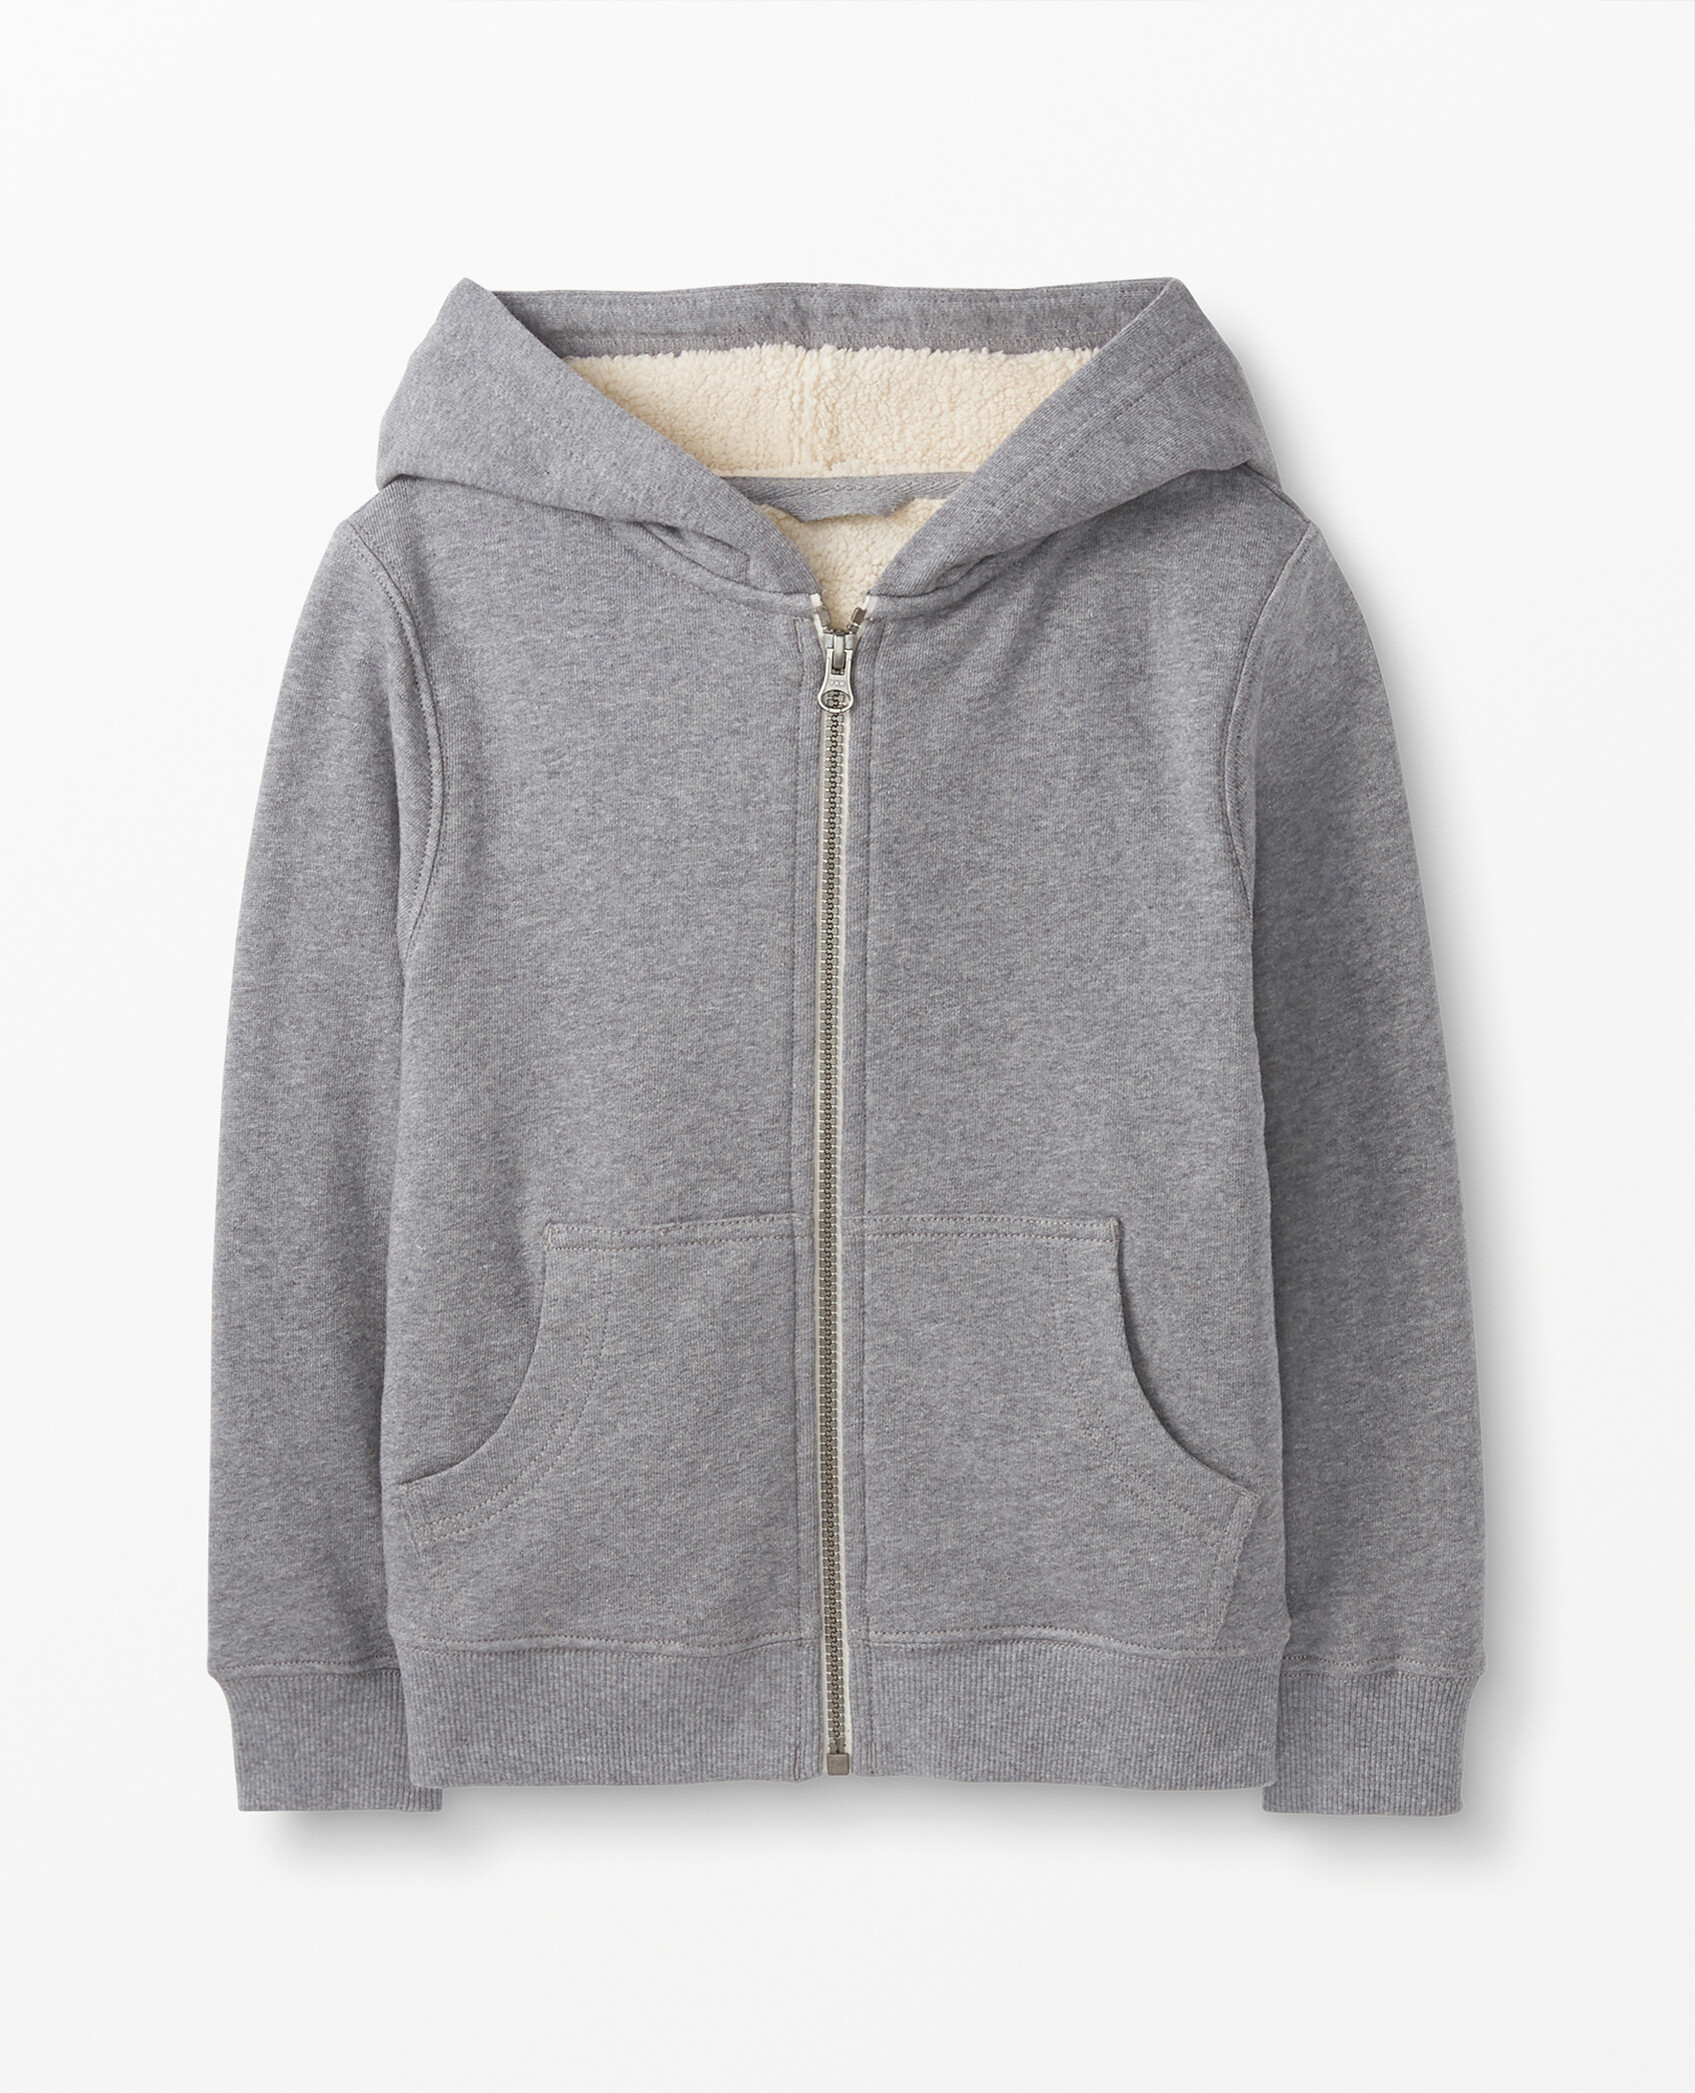 Sherpa Lined Hoodie | Hanna Andersson